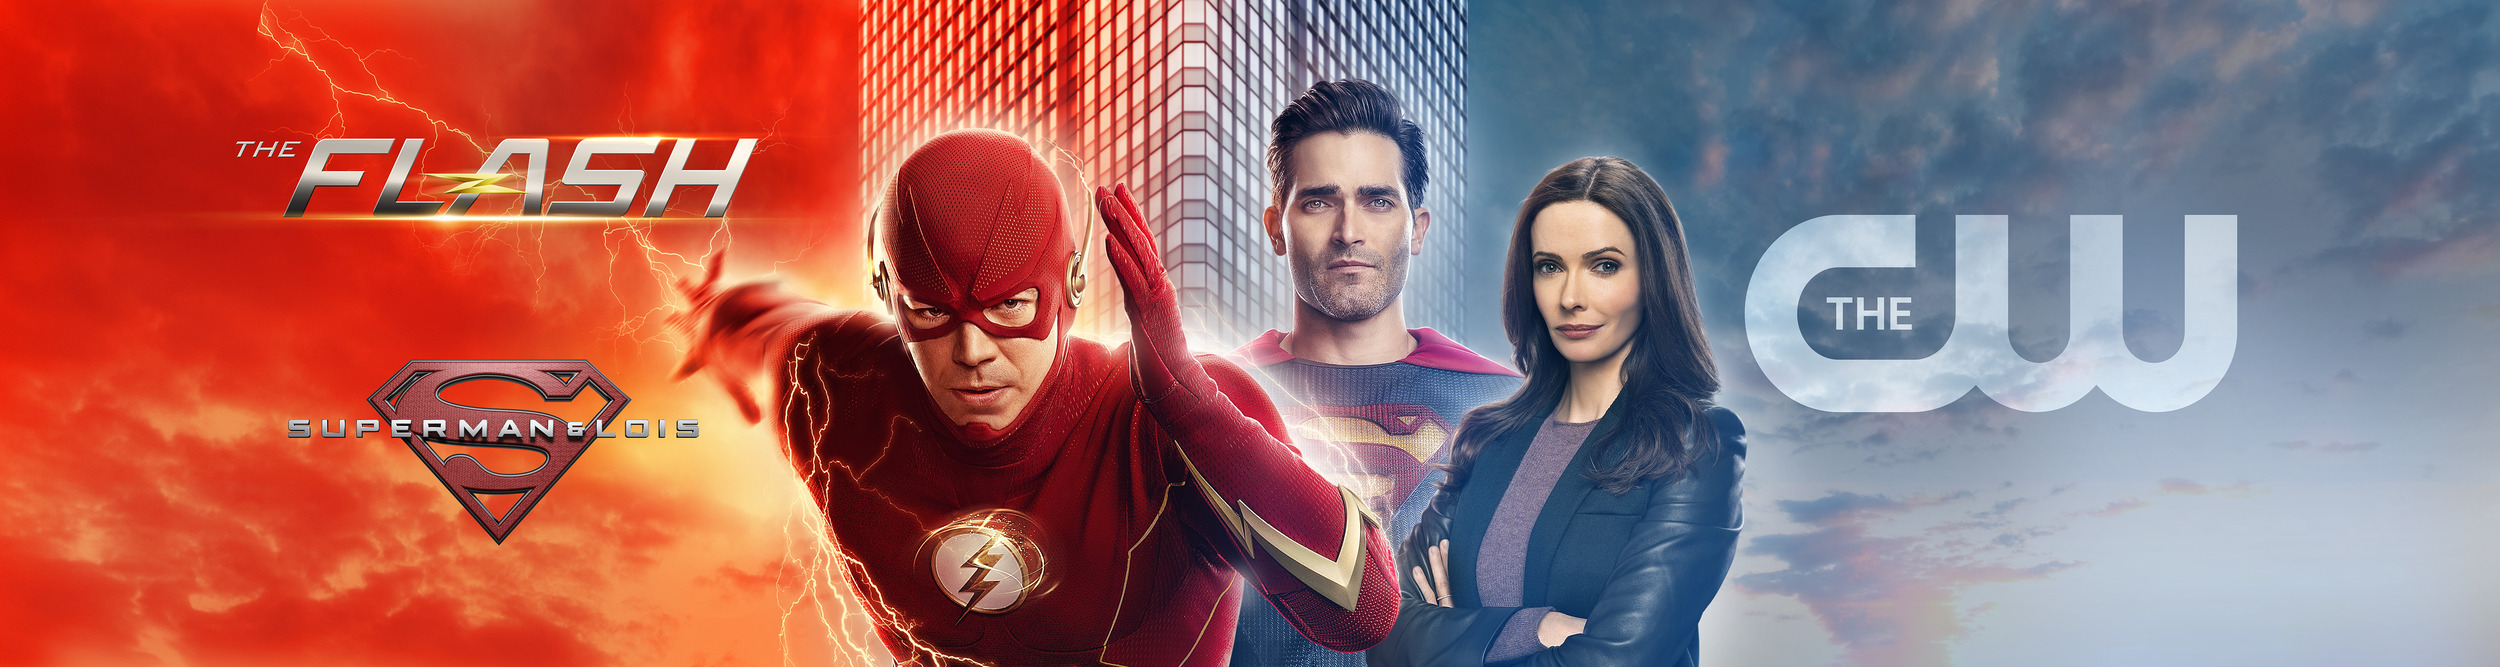 Mega Sized TV Poster Image for The Flash (#54 of 65)